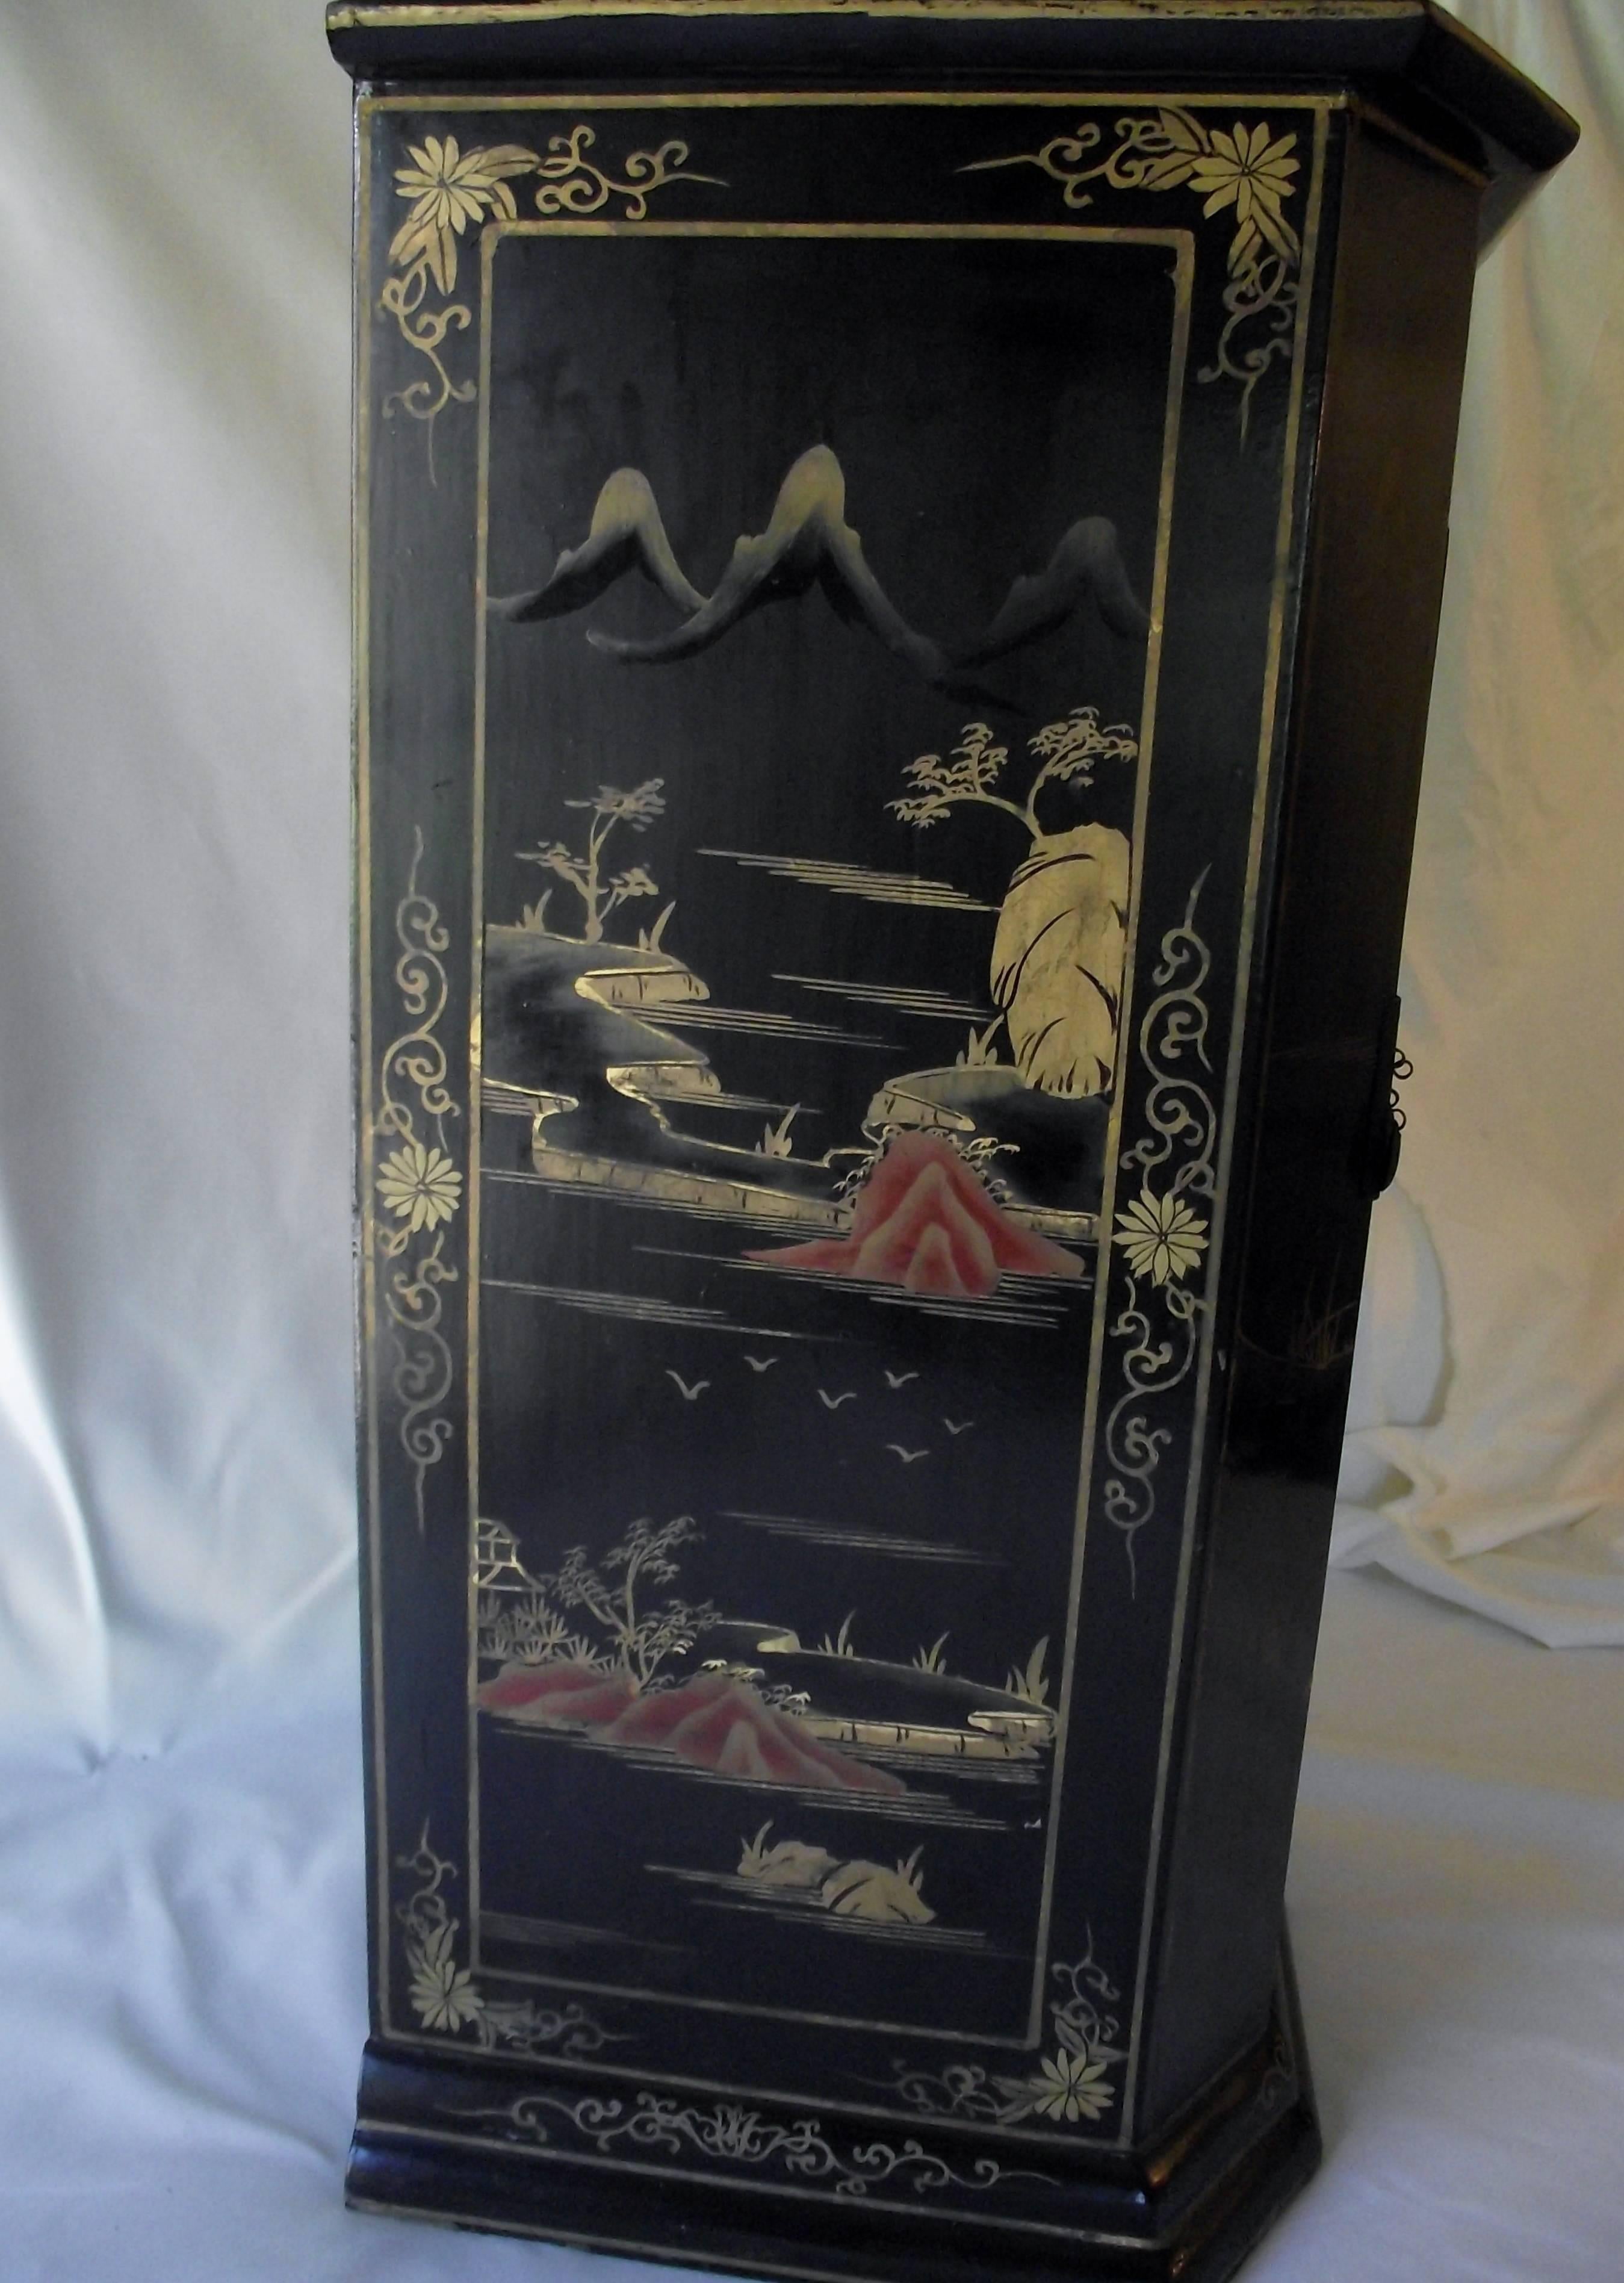 Chinese Export Coromandel Style Cabinet, Black Painted with Decals and Hand Painting, 1930s